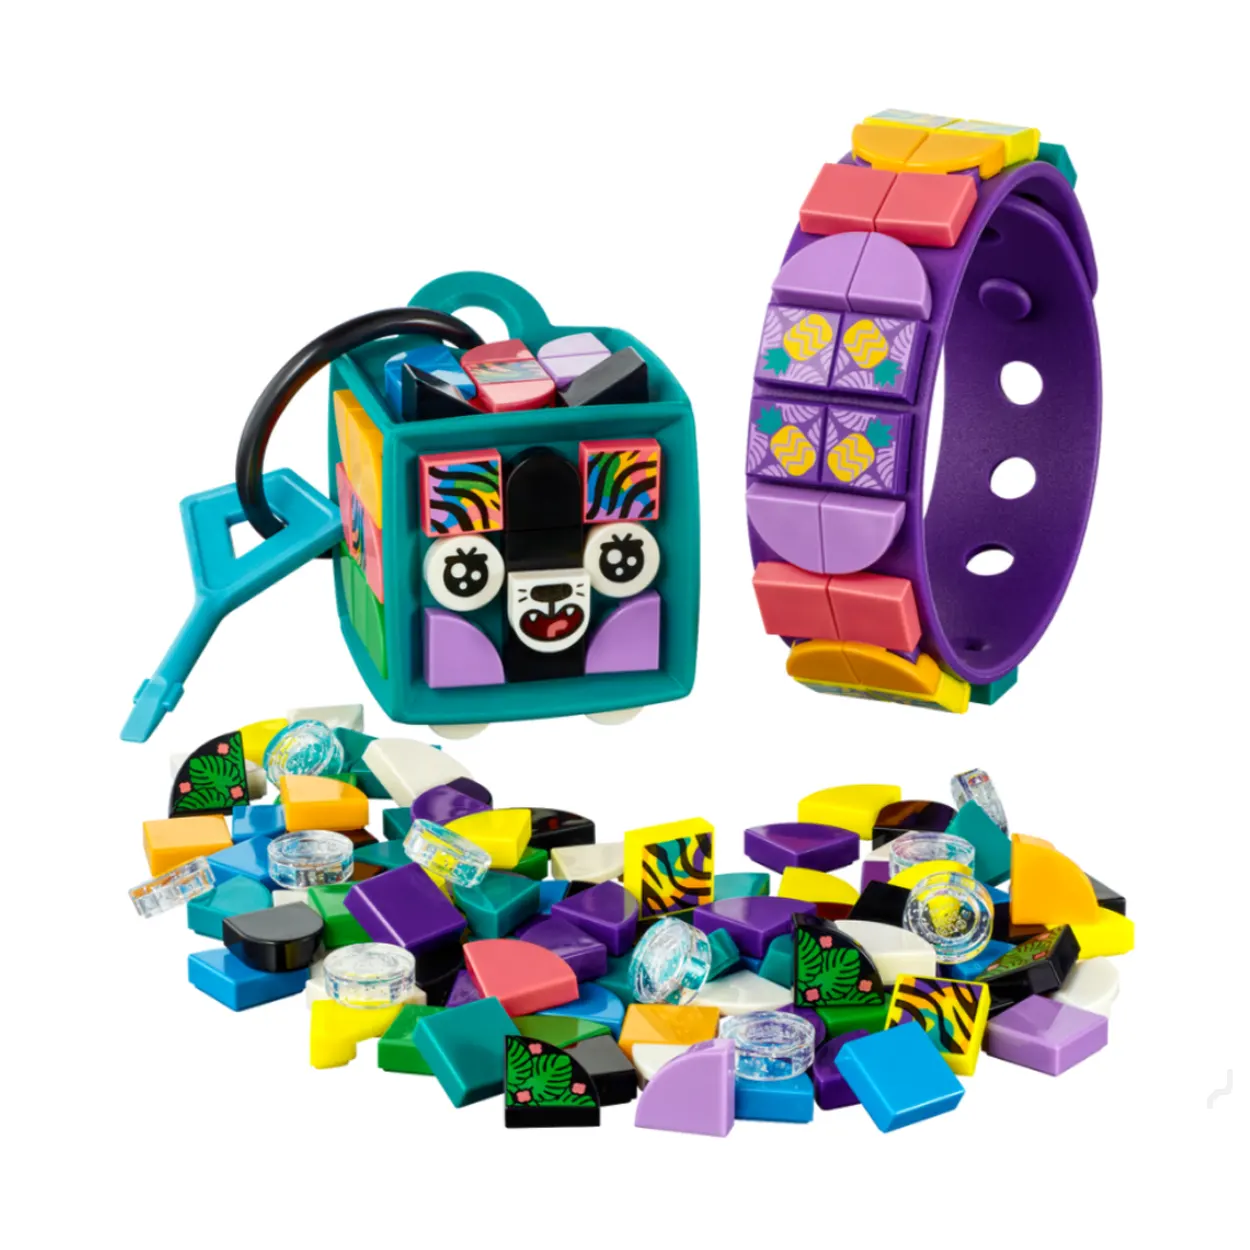 LEGO Dots New Sets for Jan. 1st 2022 Revealed | Bracelet, Charms, Extra DOTS and more